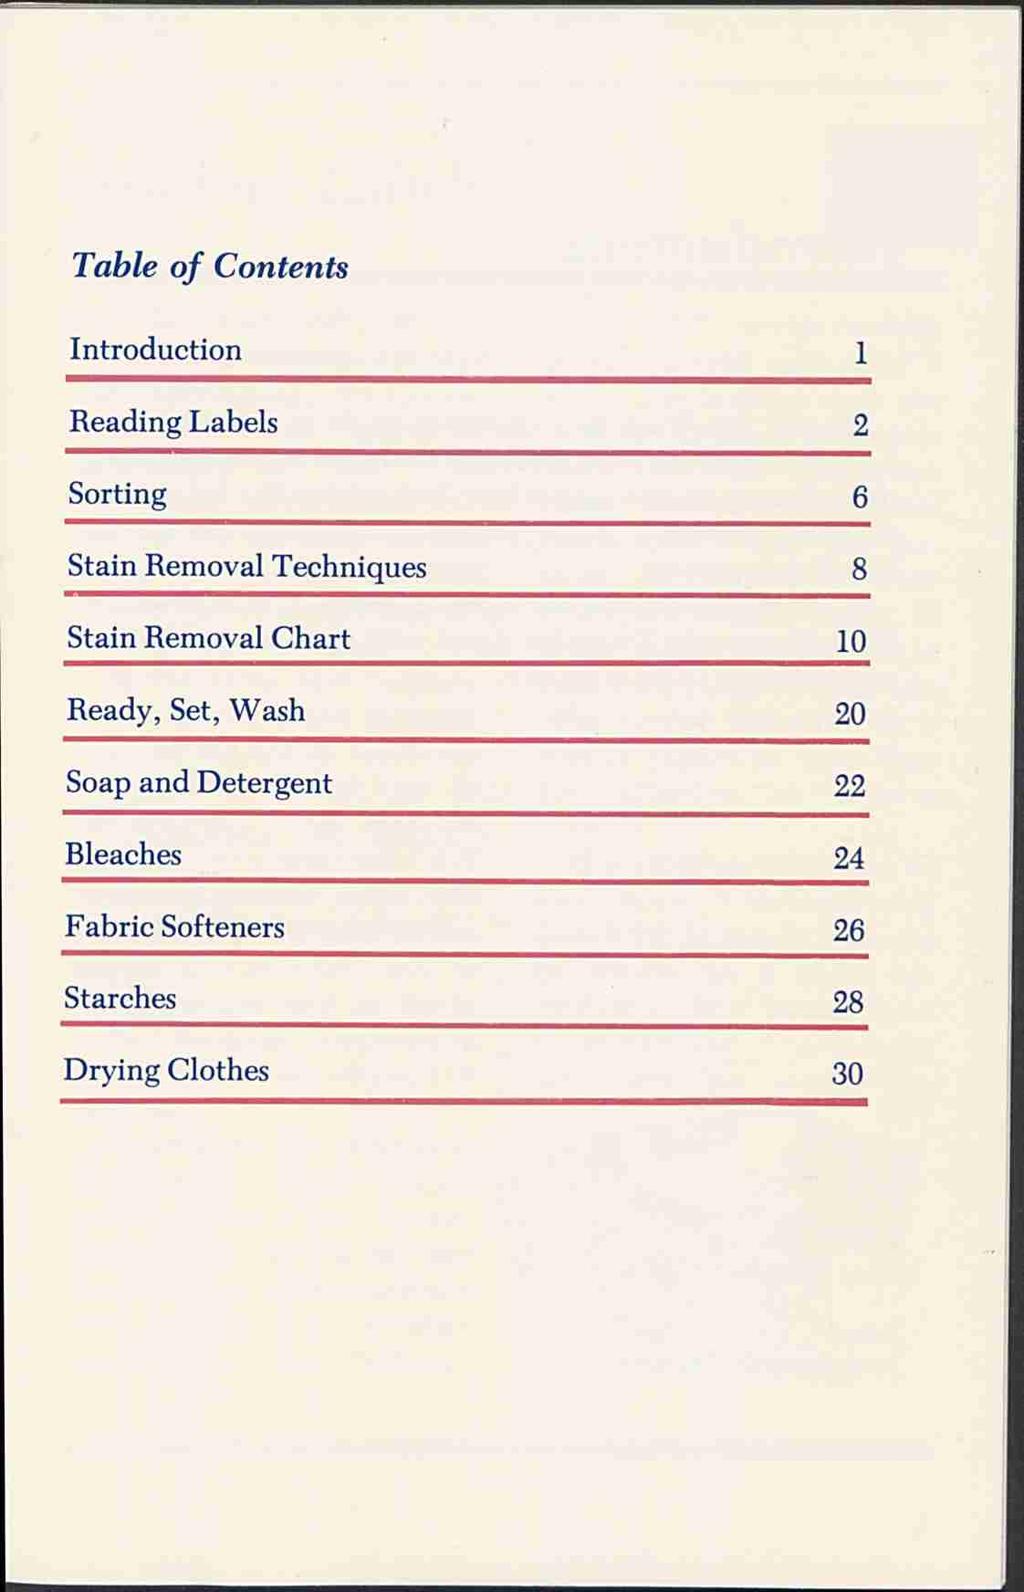 Table of Contents Introduction 1 Reading Labels 2 Sorting 6 Stain Removal Techniques 8 Stain Removal Chart